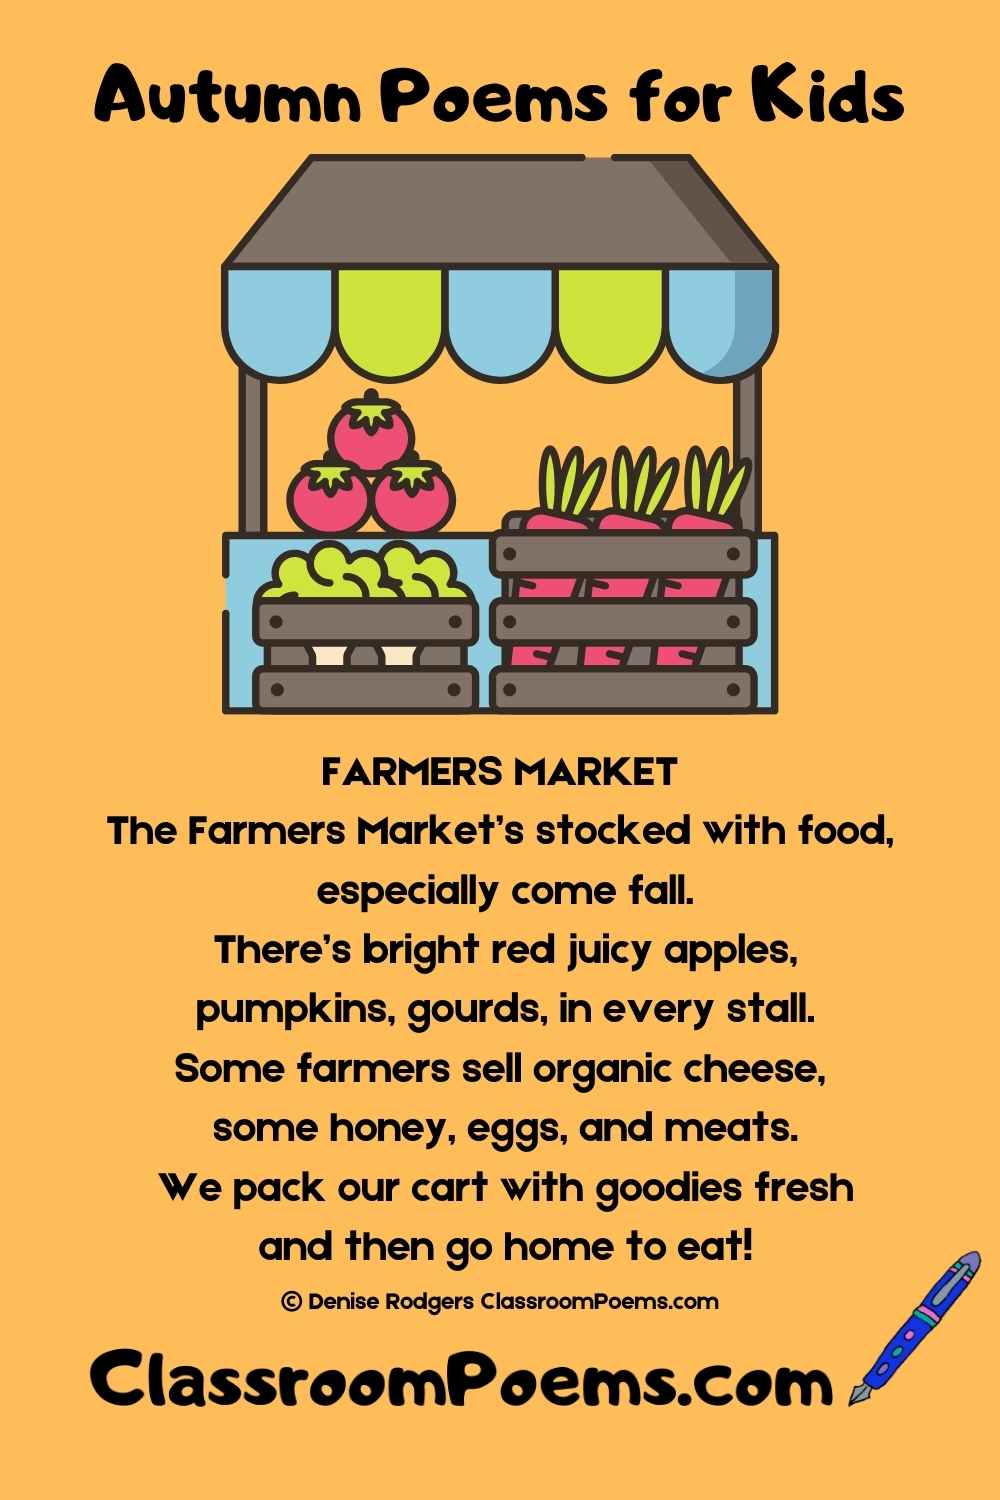 Farmers market, autumn poems for kids by Denise Rodgers on ClassroomPoems.com.